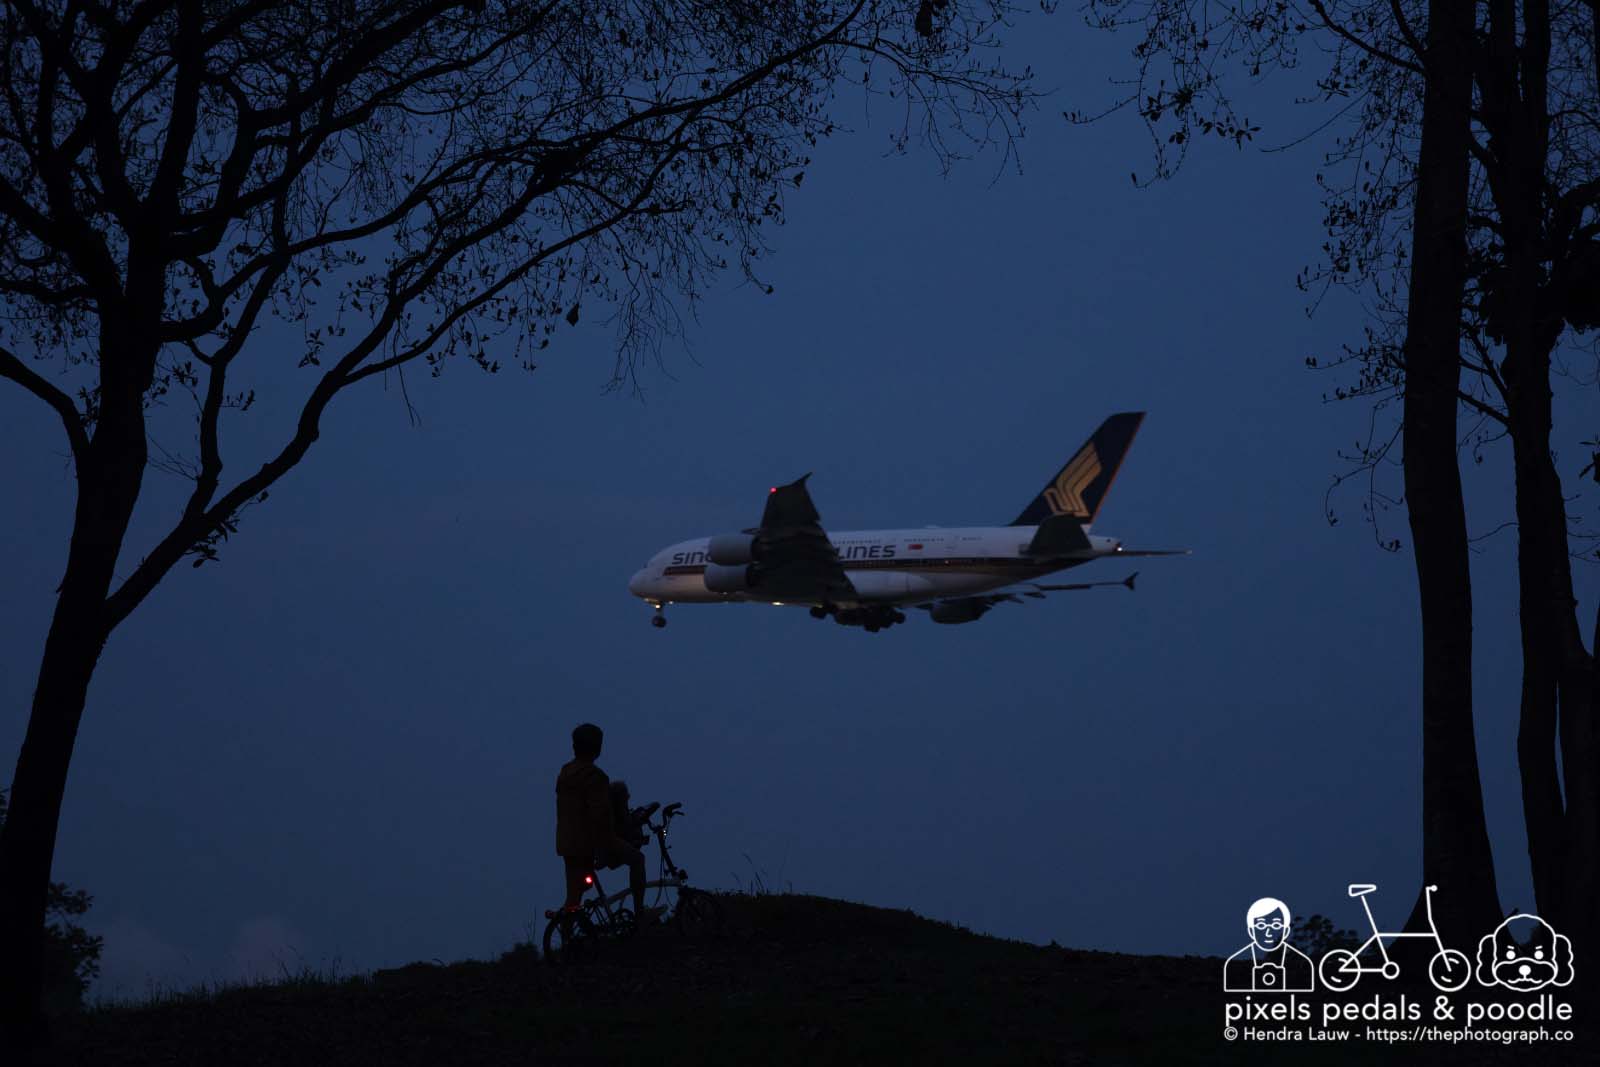 Plane Spotting SIA 9V-SKN by Pixels Pedals and Poodle 20230419